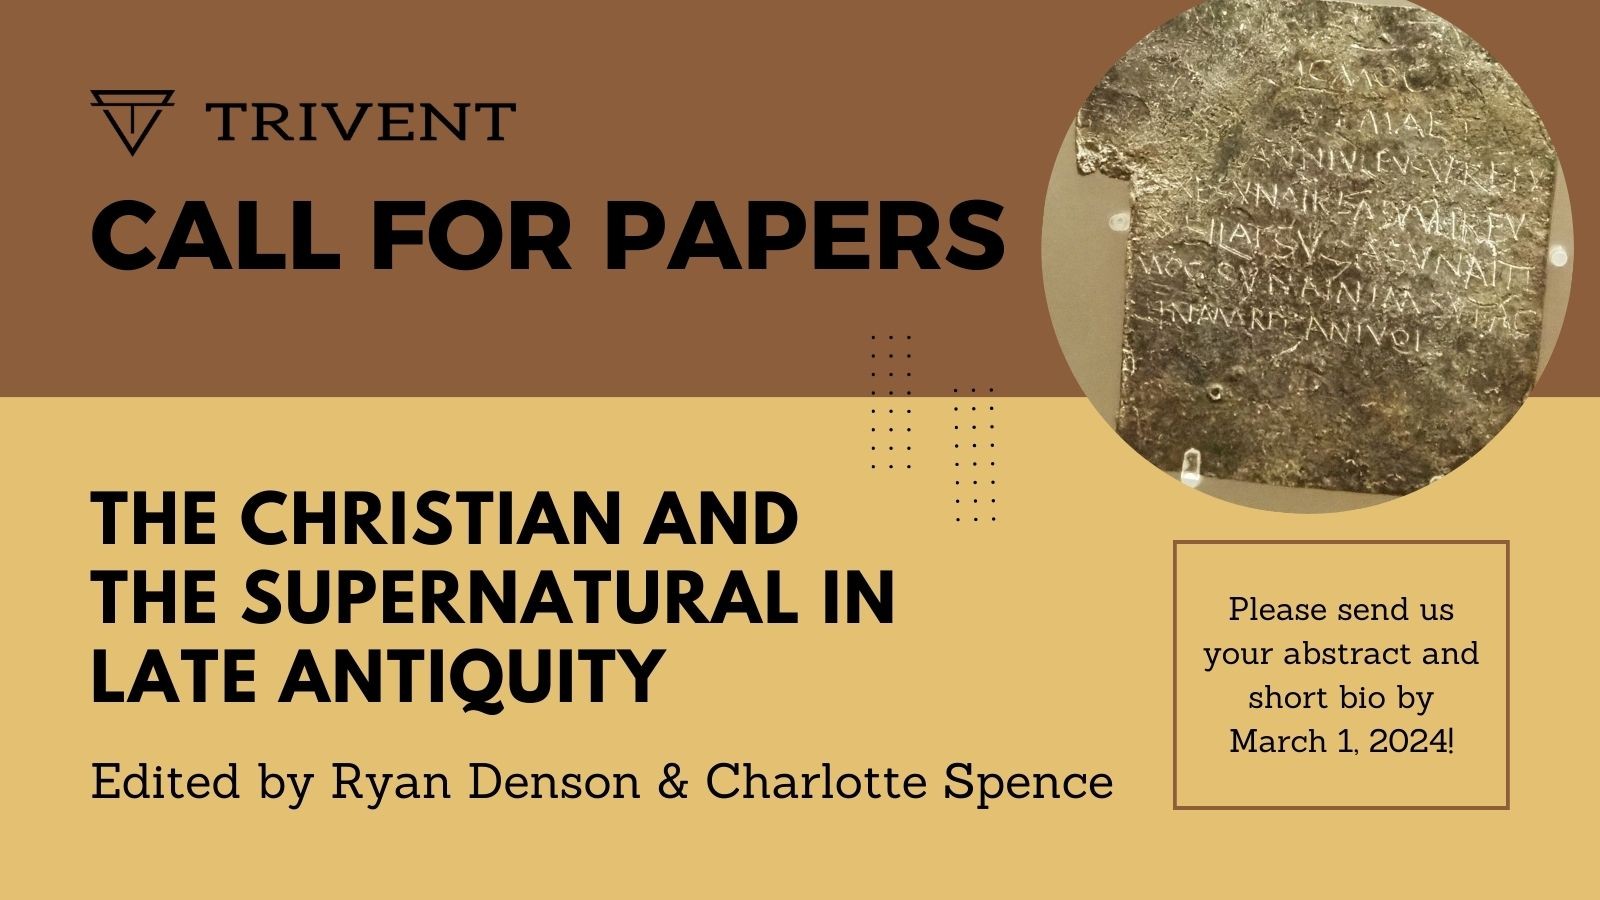 The Christian and the Supernatural in Late Antiquity